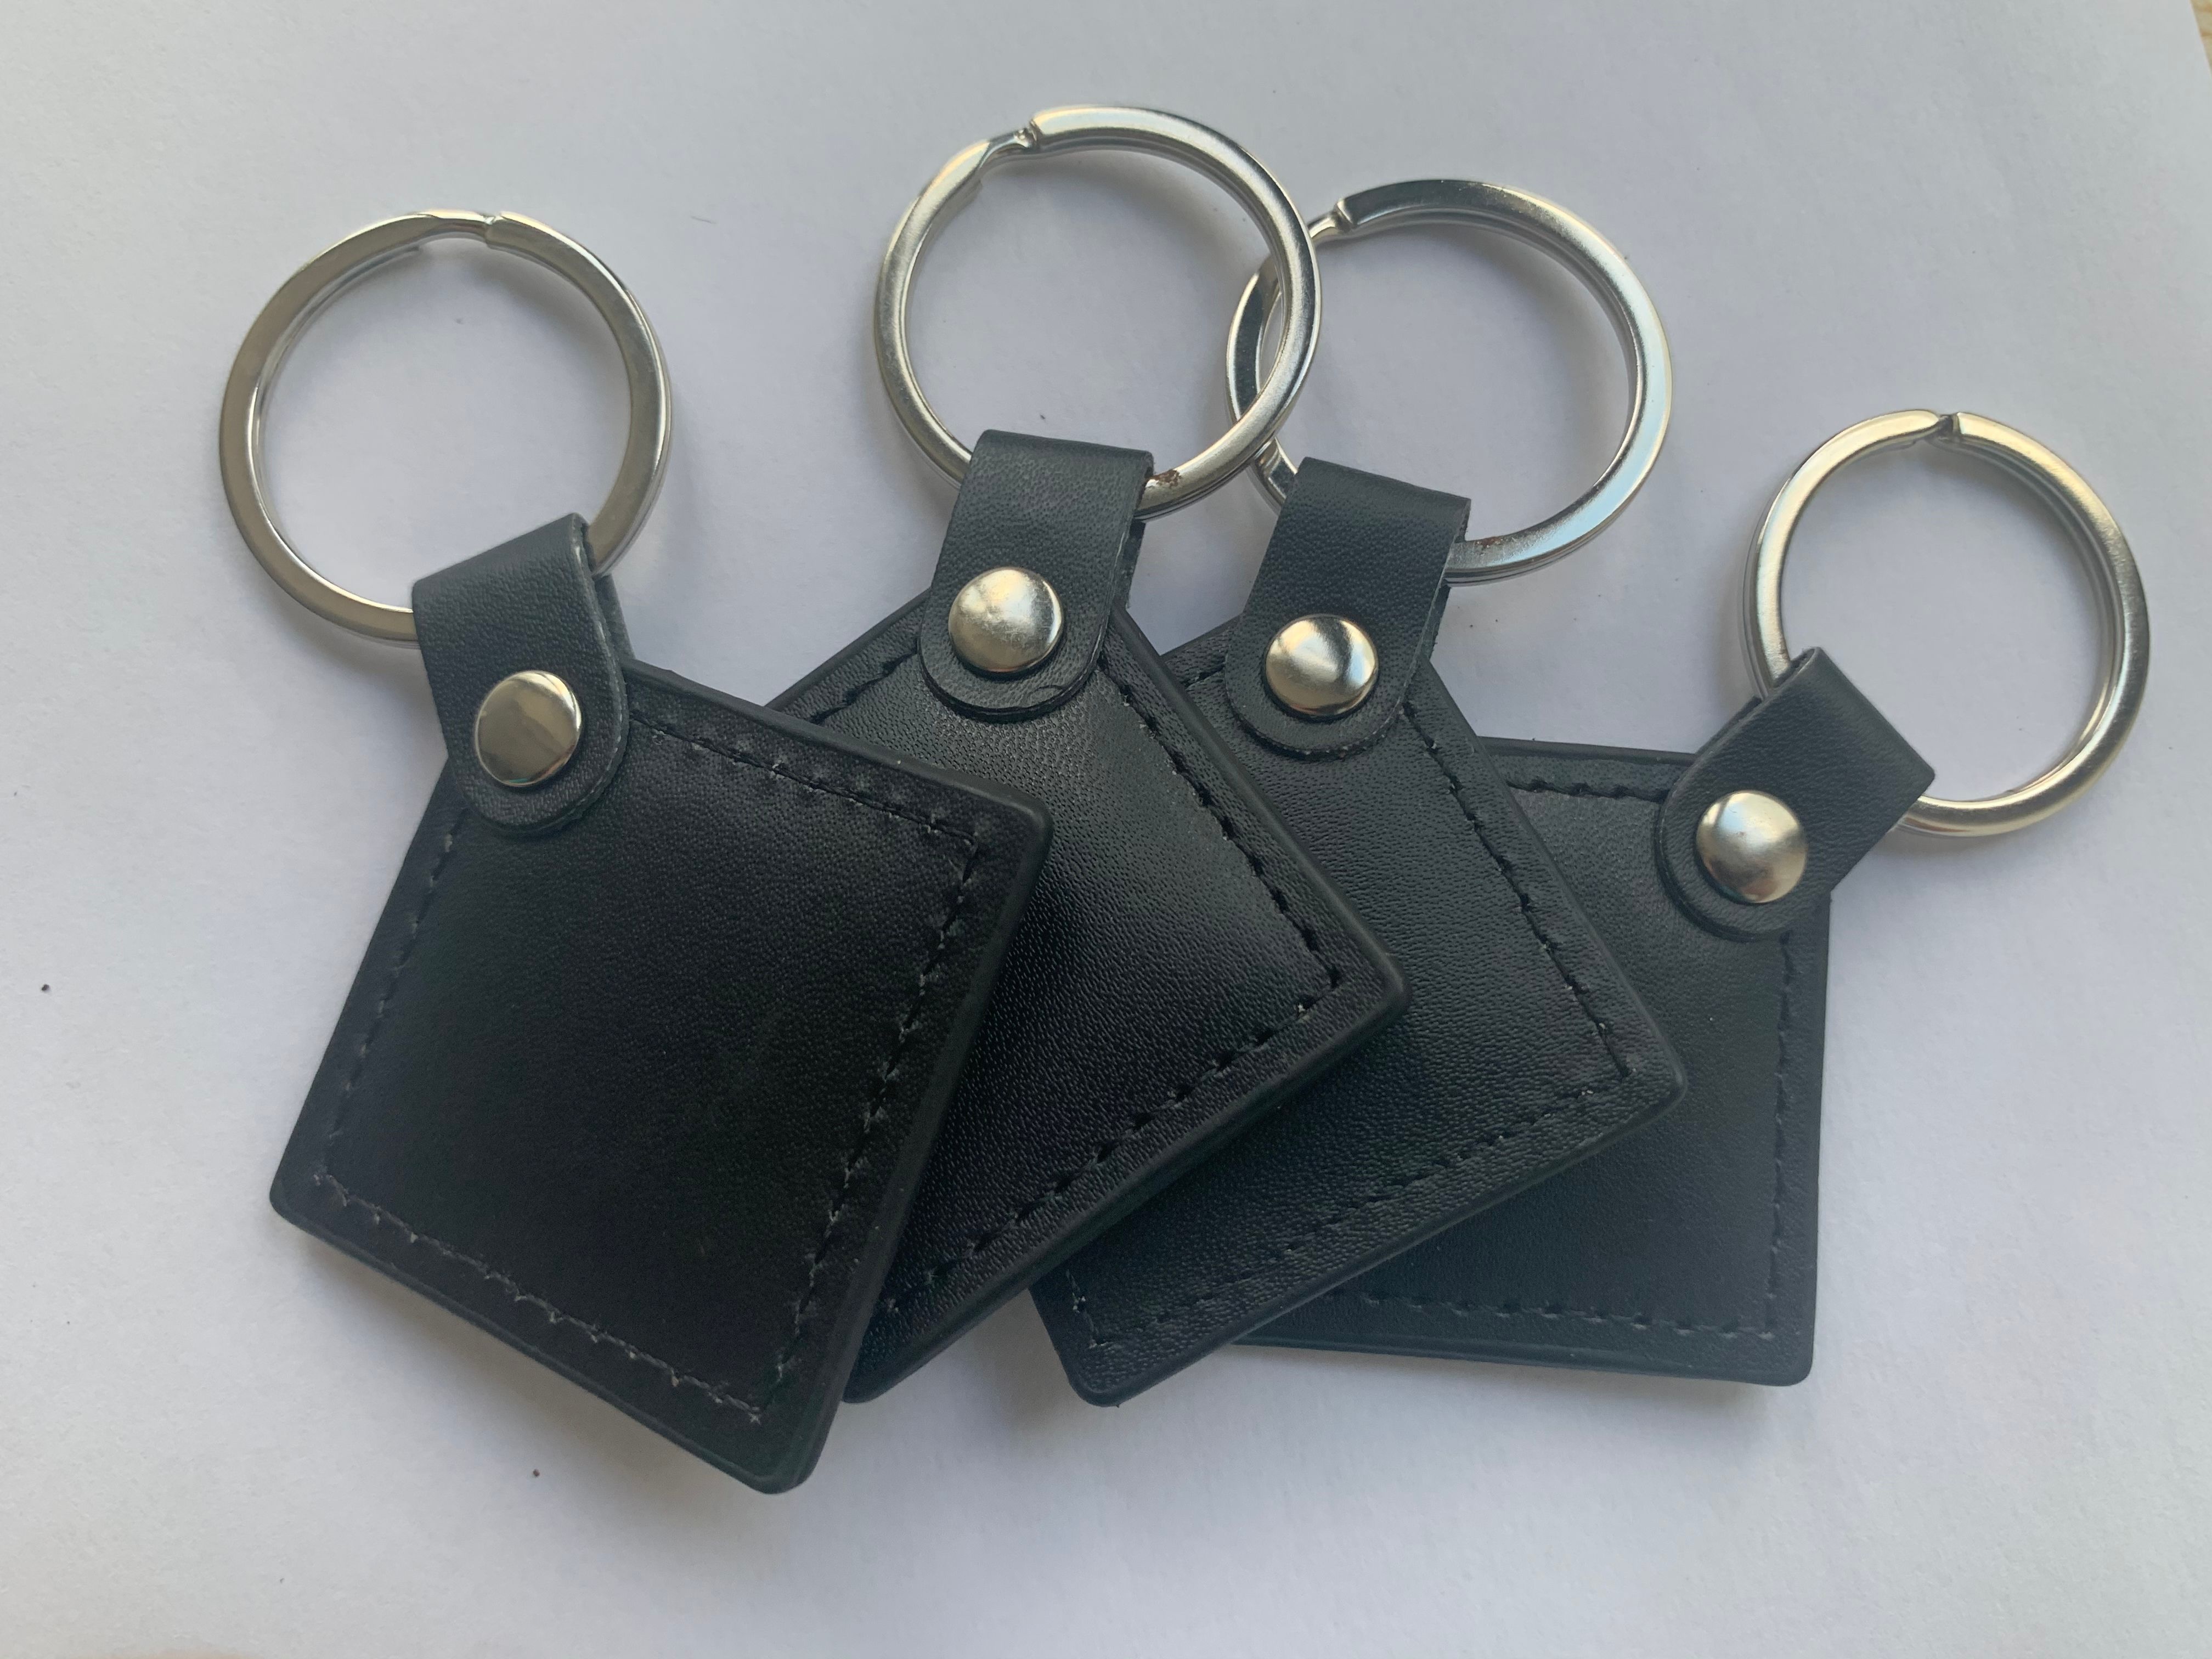 Access Control 125khz fob RFID leather Key EM 4305 with emboss logo